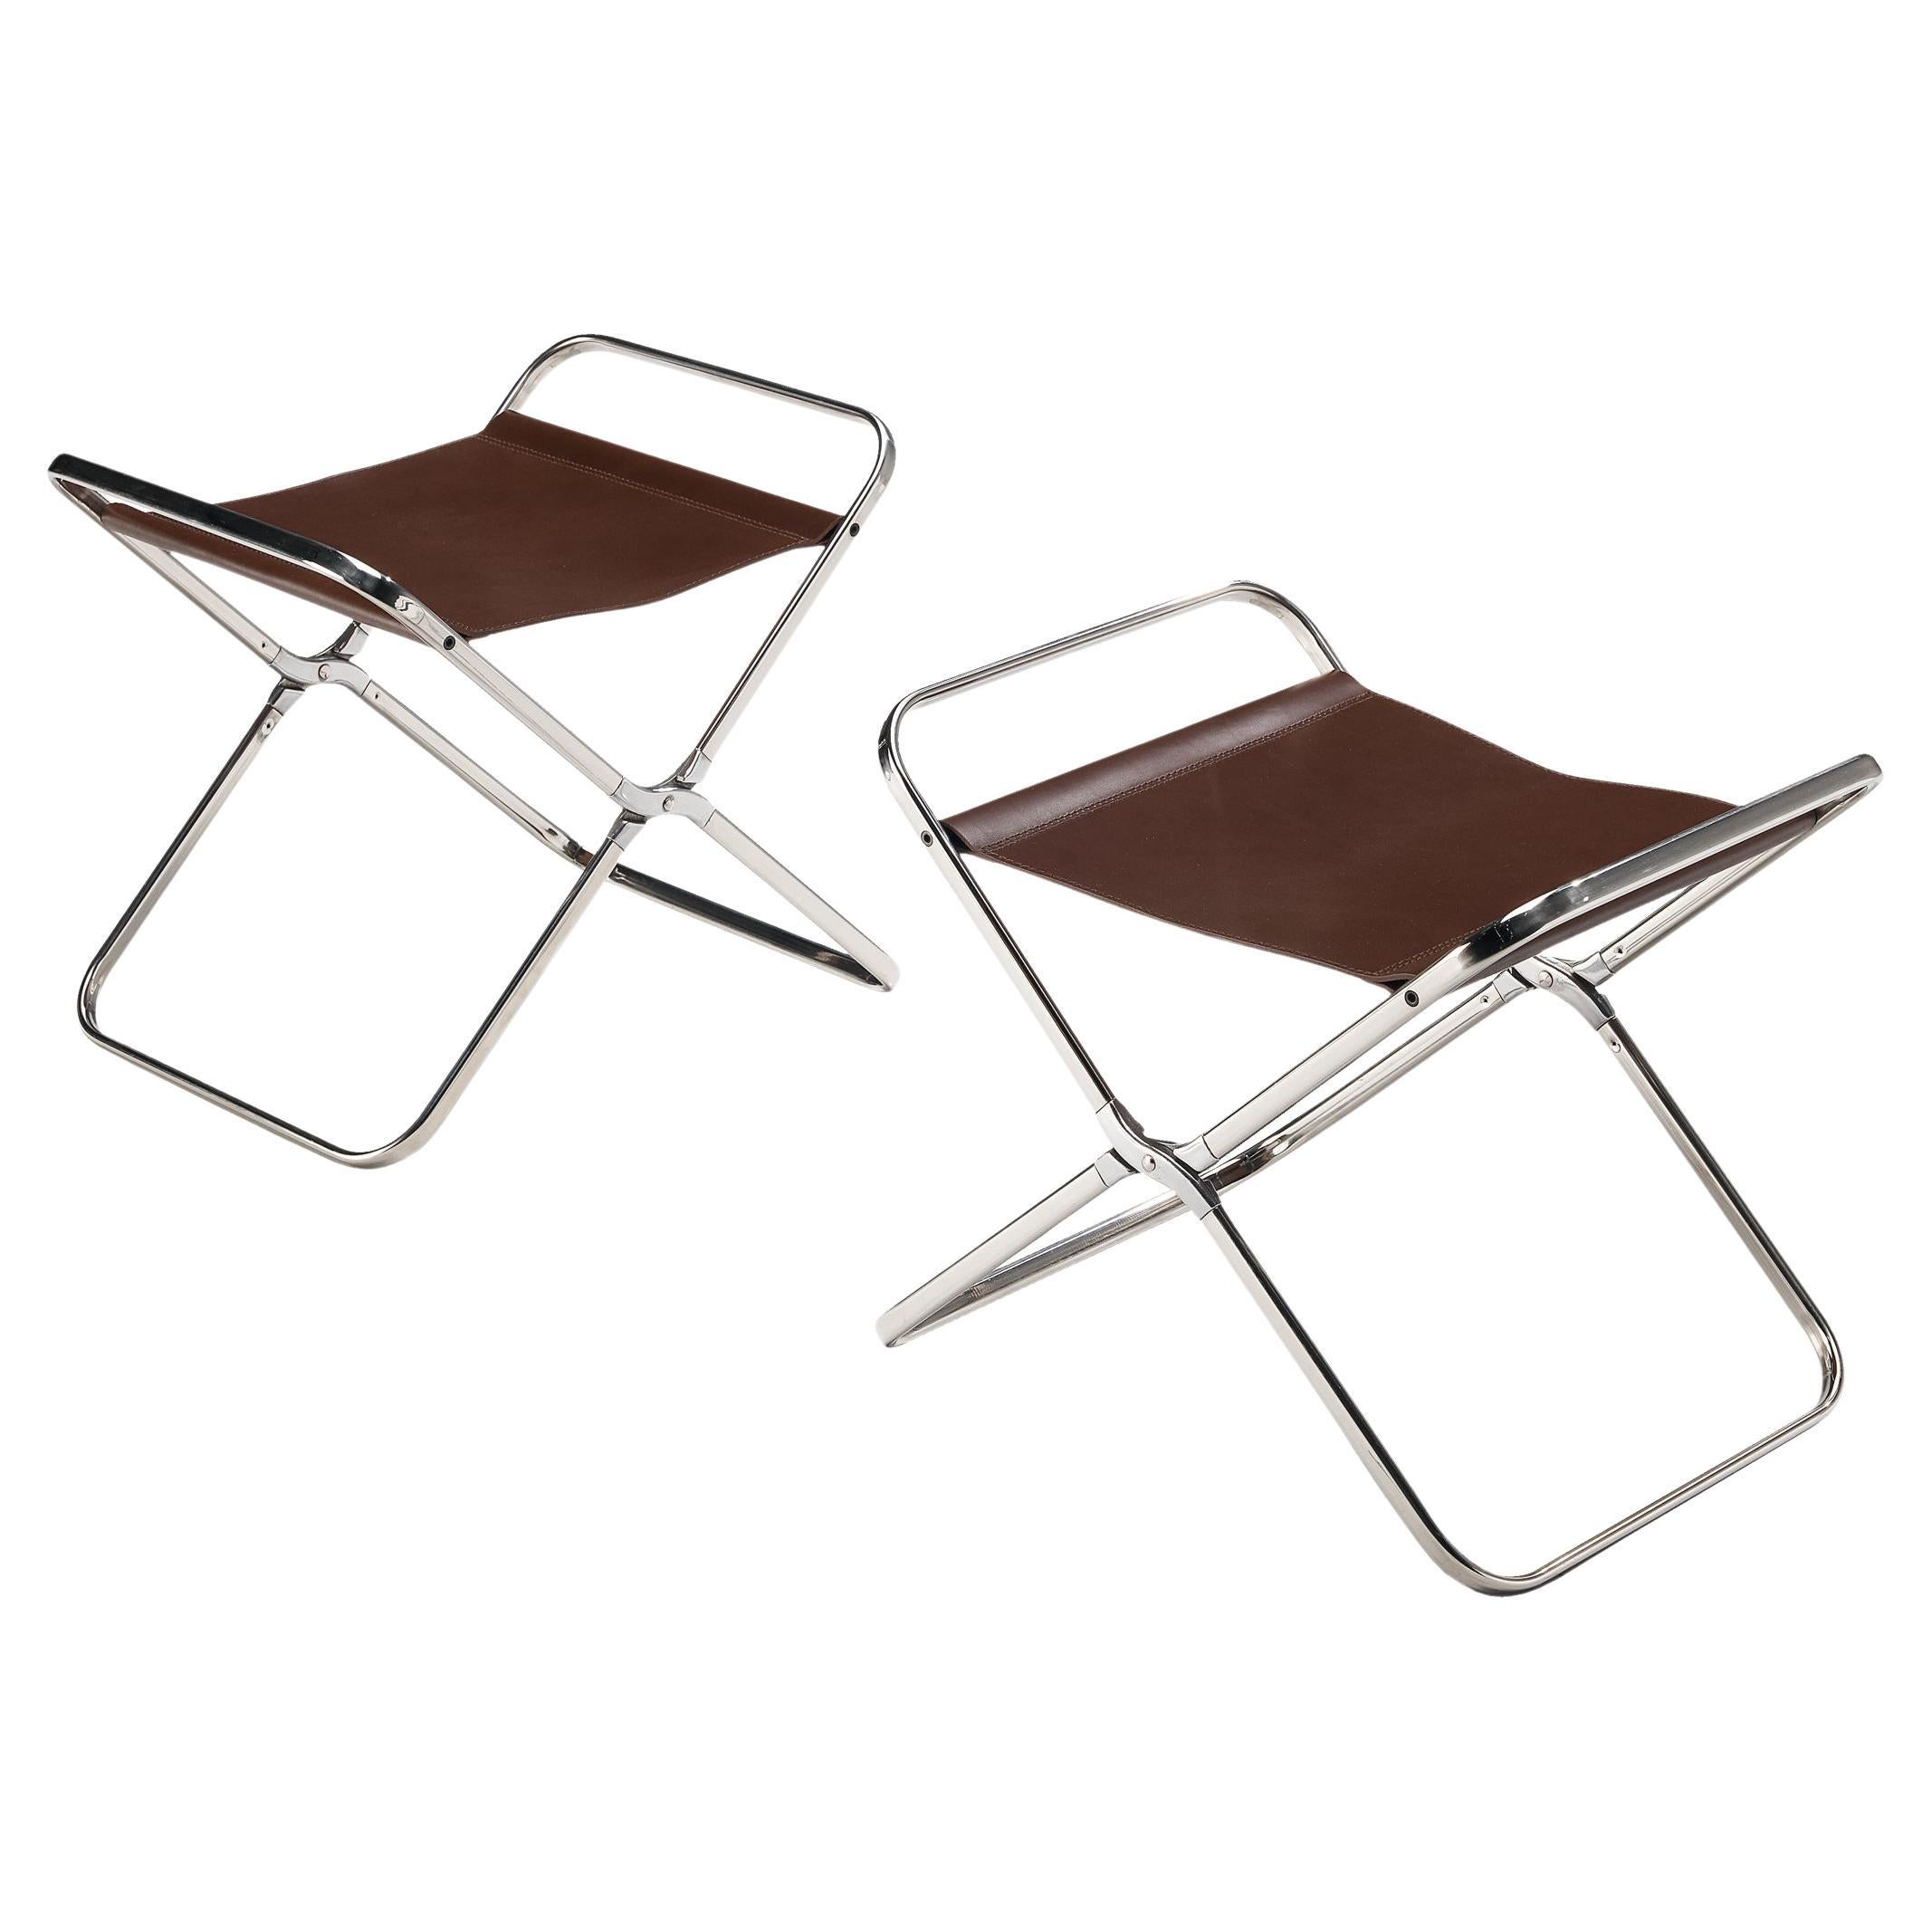 Gae Aulenti for Zanotta 'April' Folding Stools in Stainless Steel and Leather